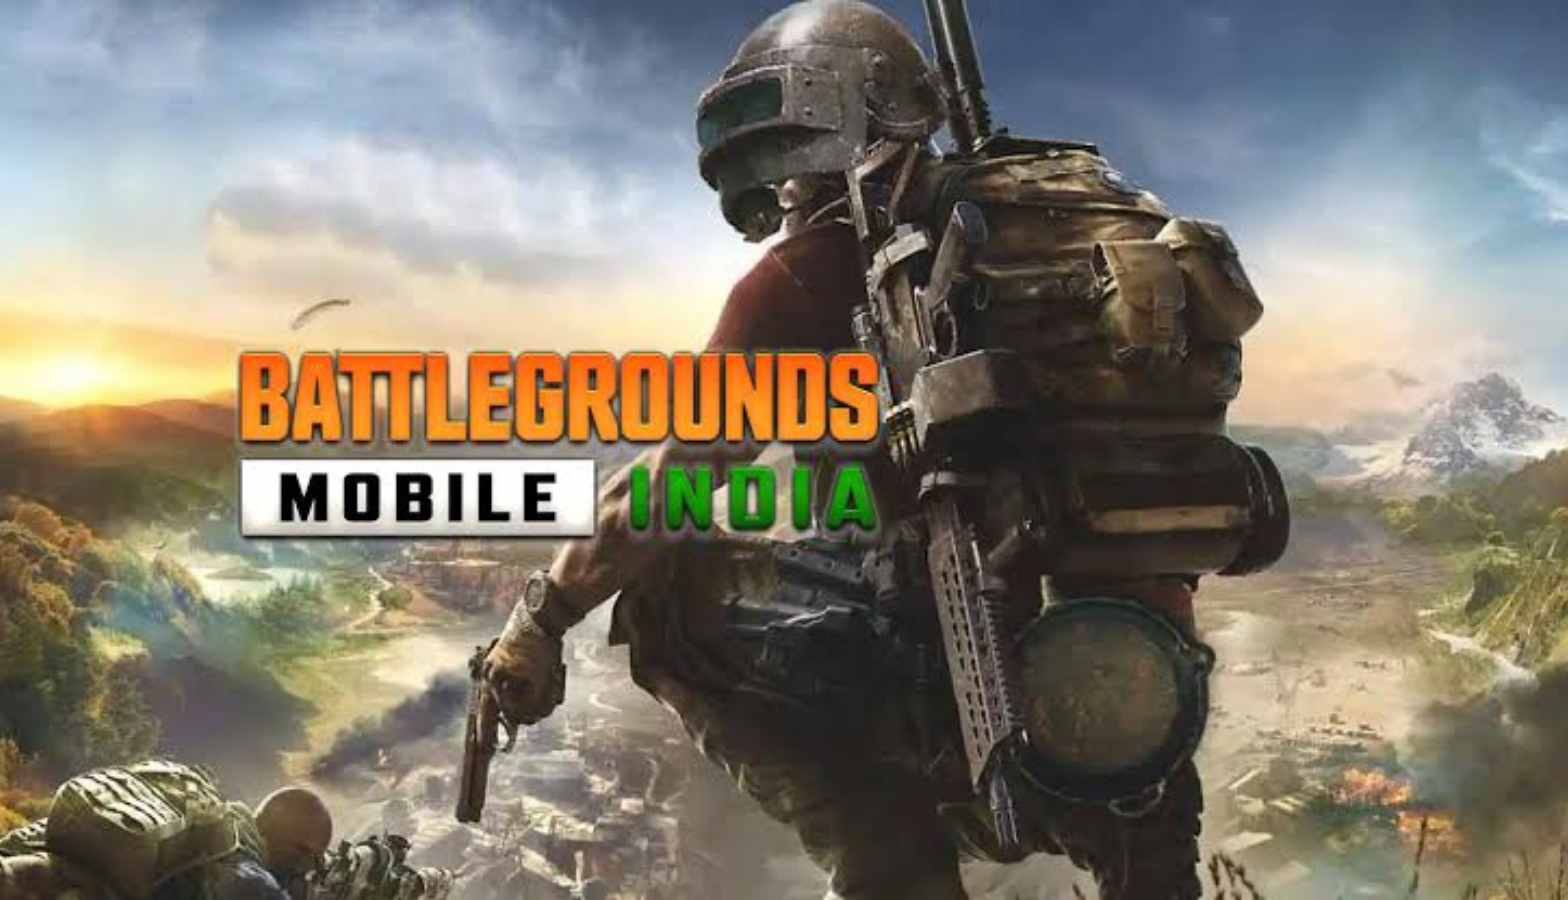 Battlegrounds Mobile India: Check whether Indian players can download BGMI 2.6 Update Apk or not, CHECK DETAILS